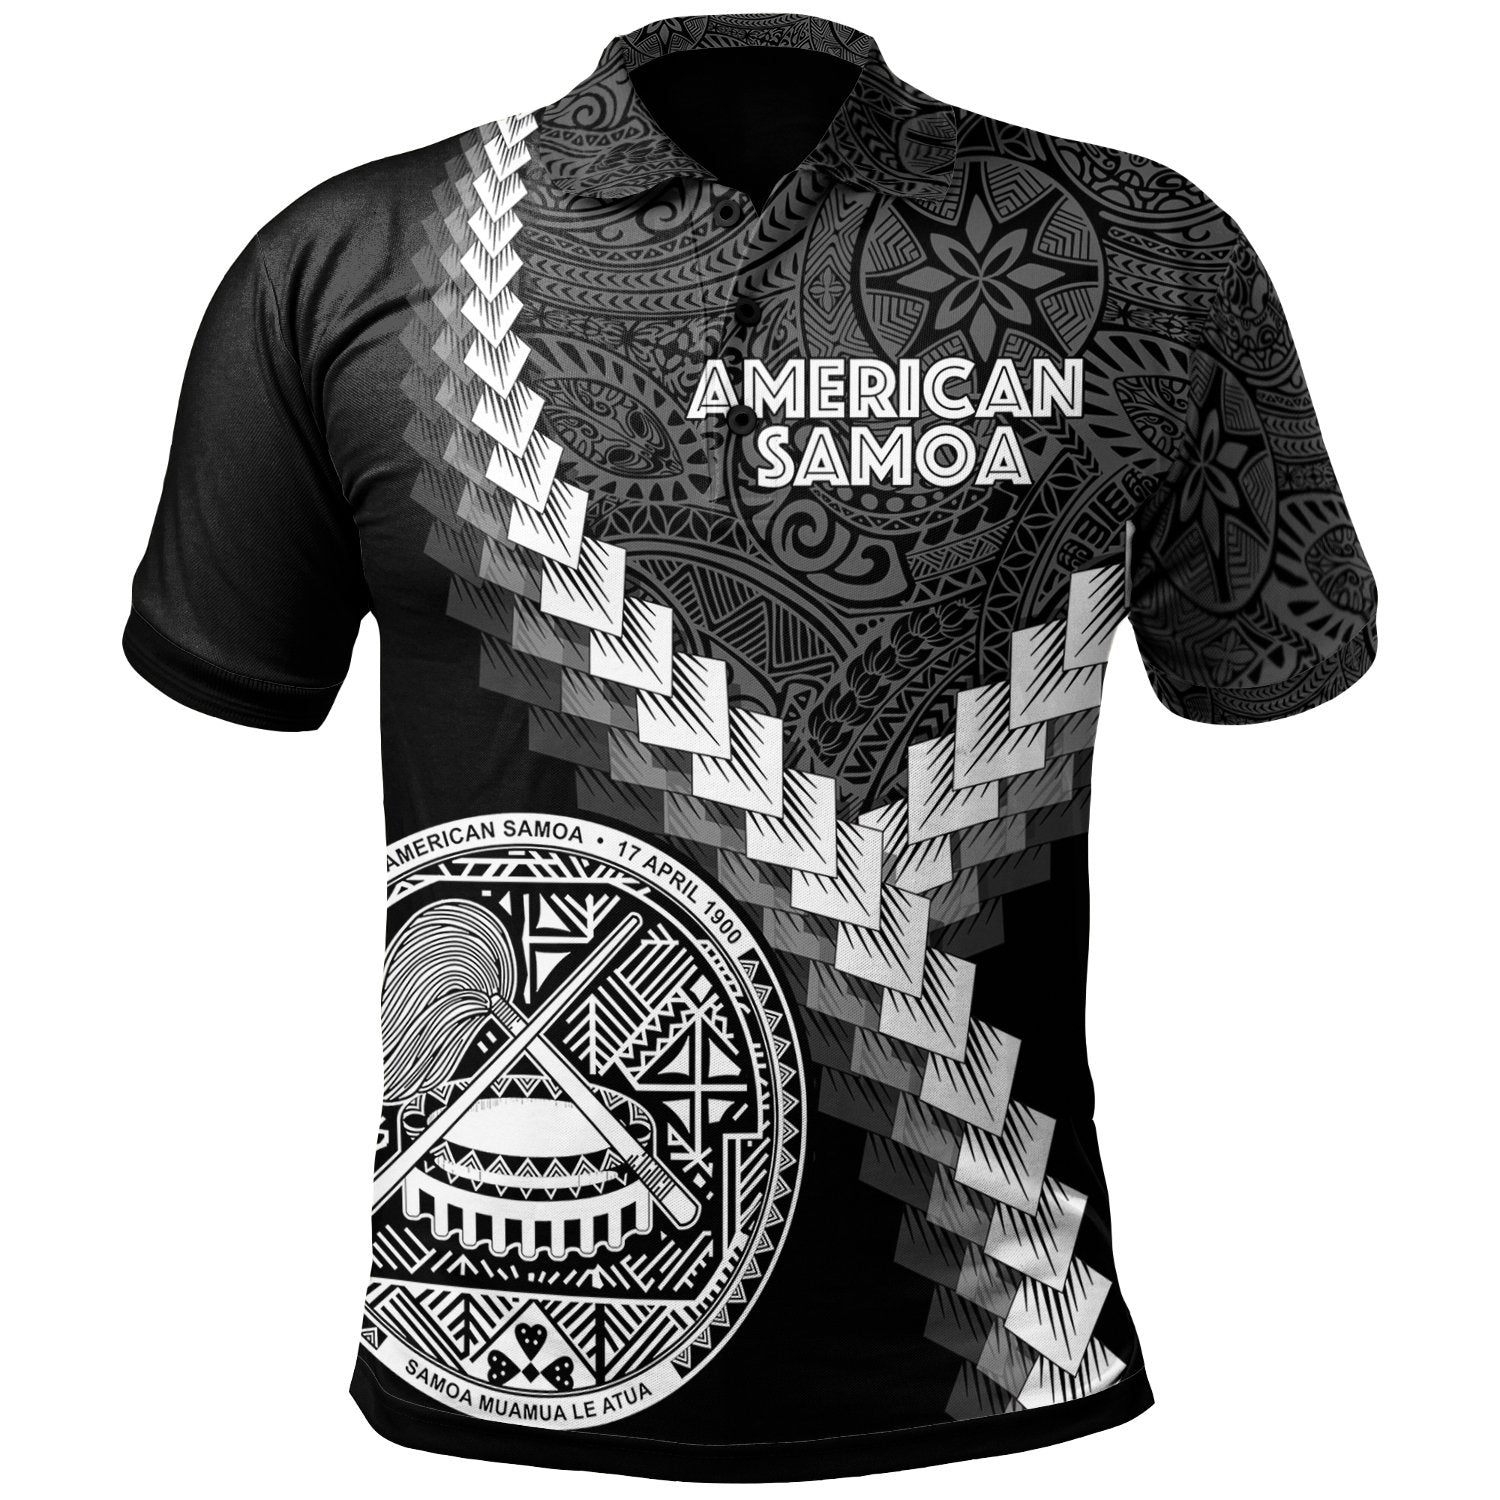 Samoa Black And White Fashion 3D Printed Sublimation Hoodie Hooded  Sweatshirt Comfy Soft And Warm For